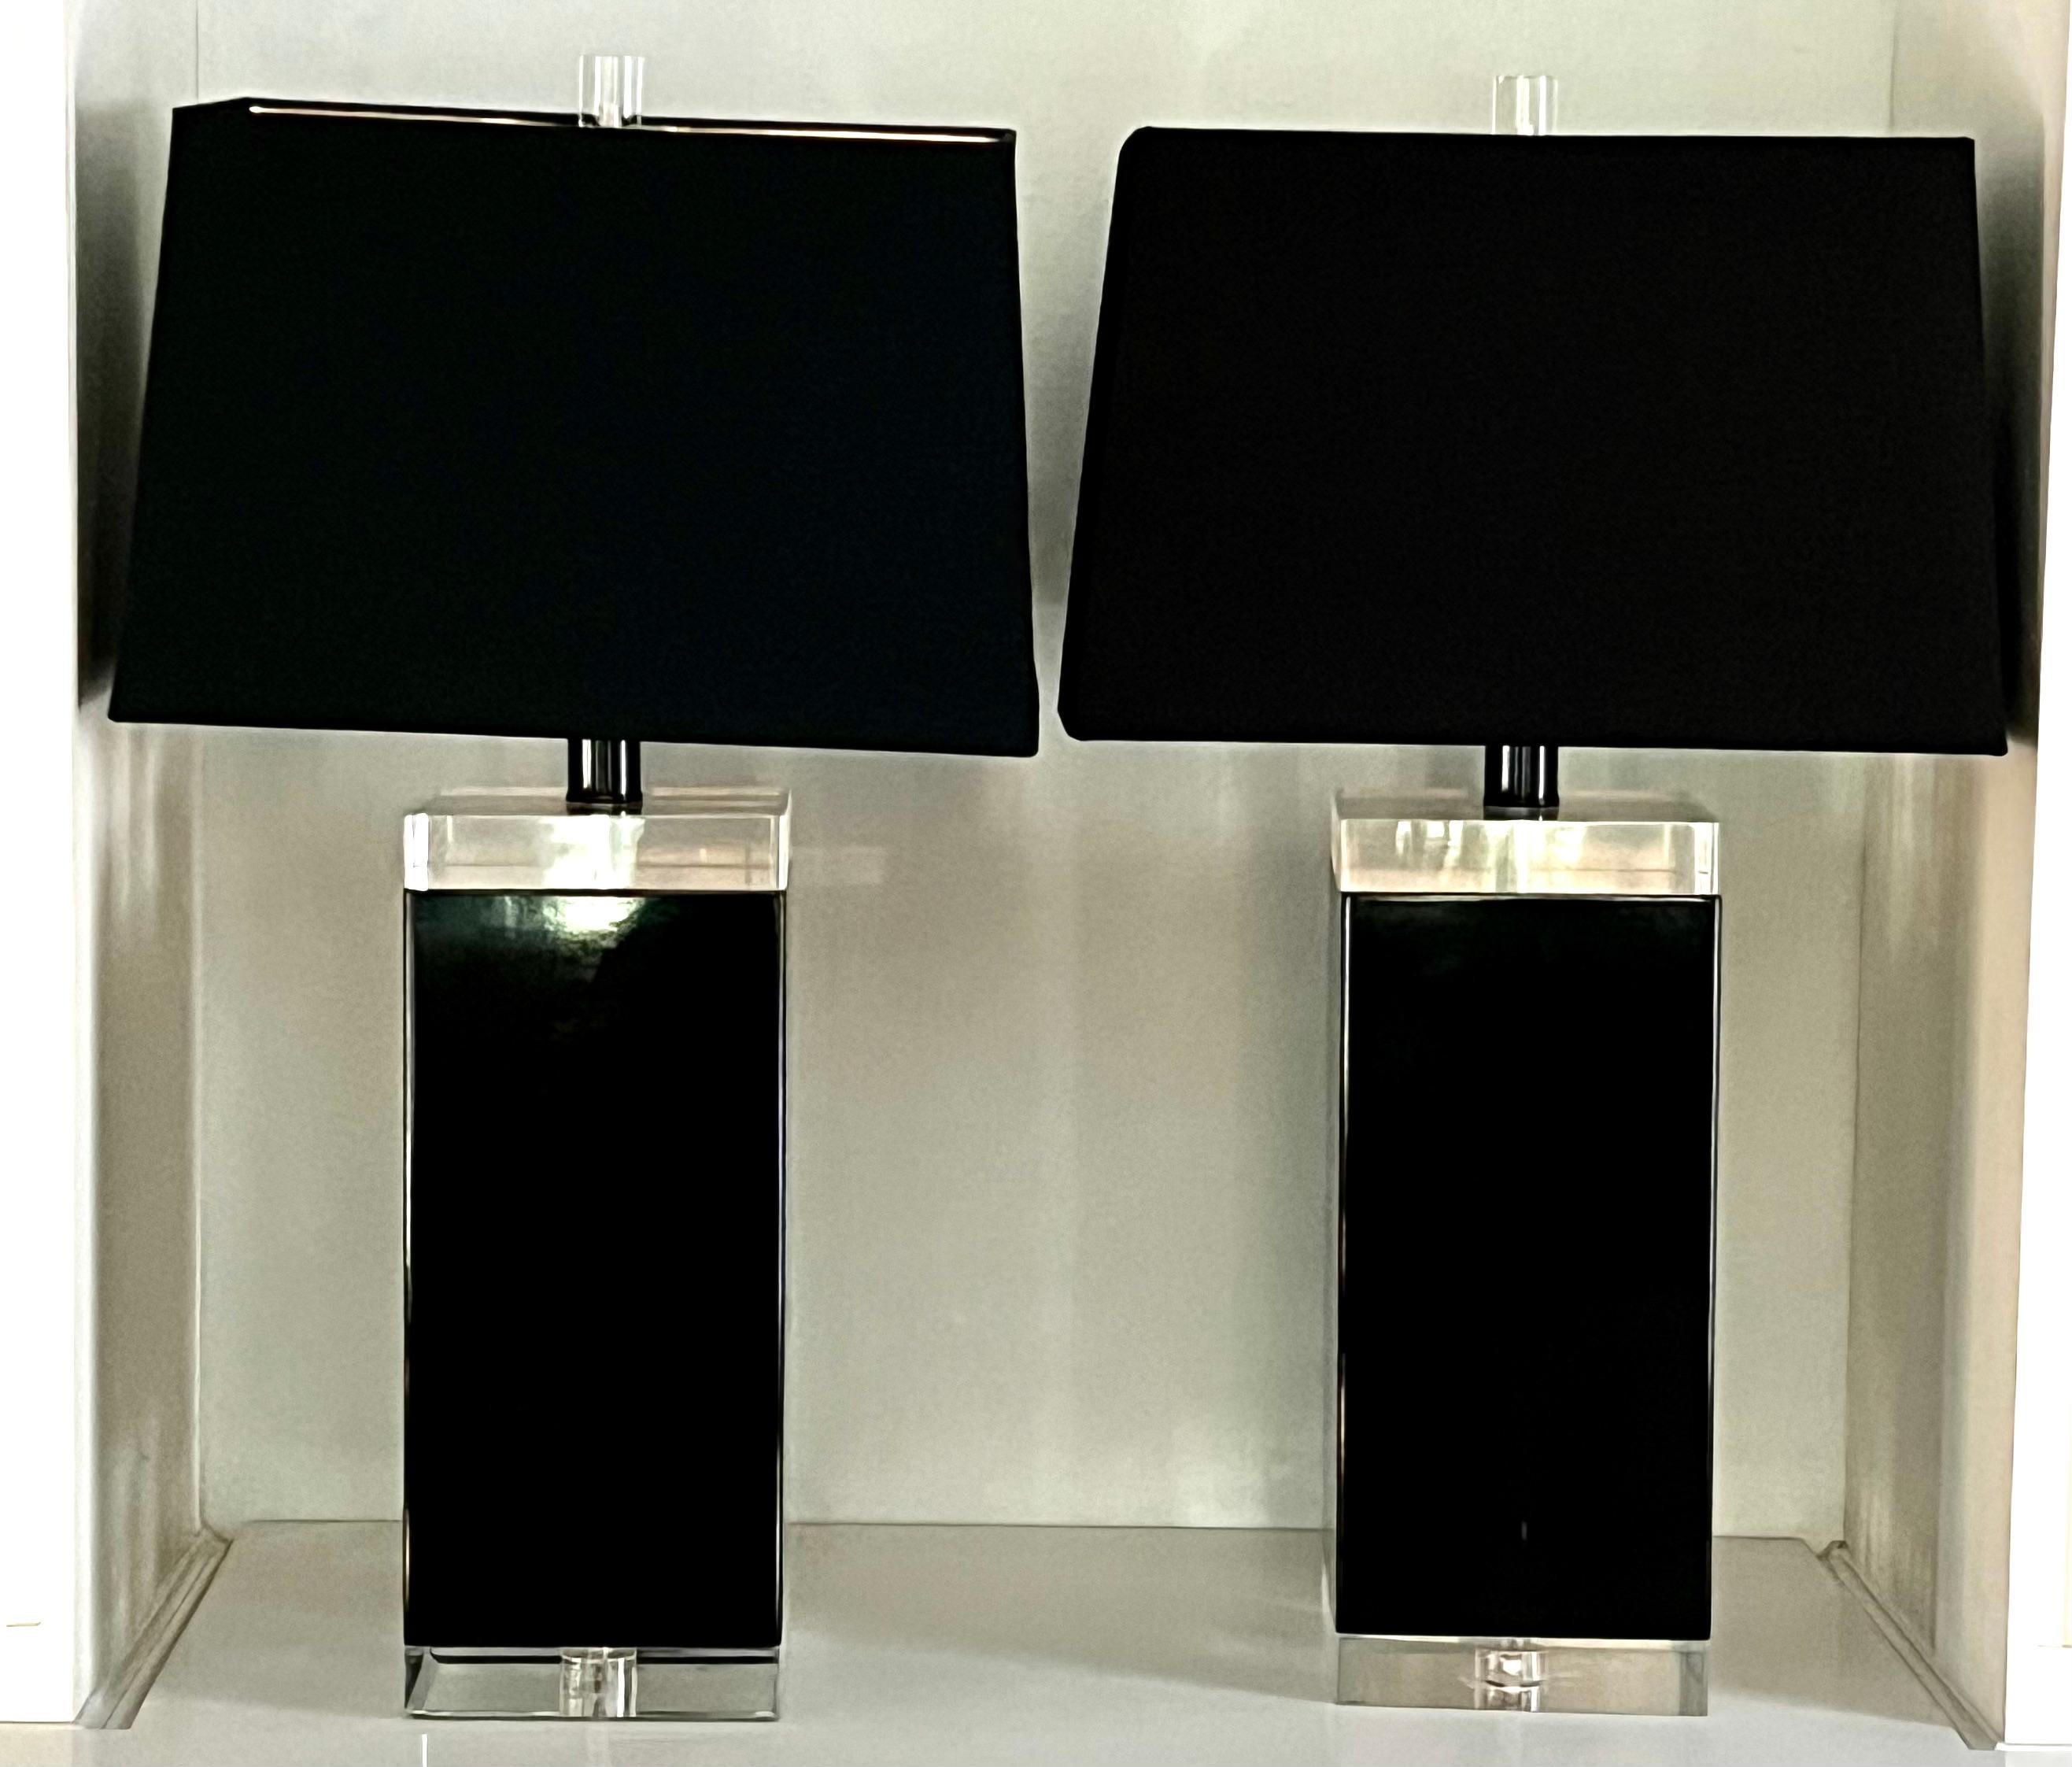 A pair of Acrylic Mid Century Modern Black and clear acrylic lamps.  The pair are large and important in size and weight.  The Black acrylic is sandwiched between two thick pieces of clear acrylic.  The pair are in great condition and ready to use. 